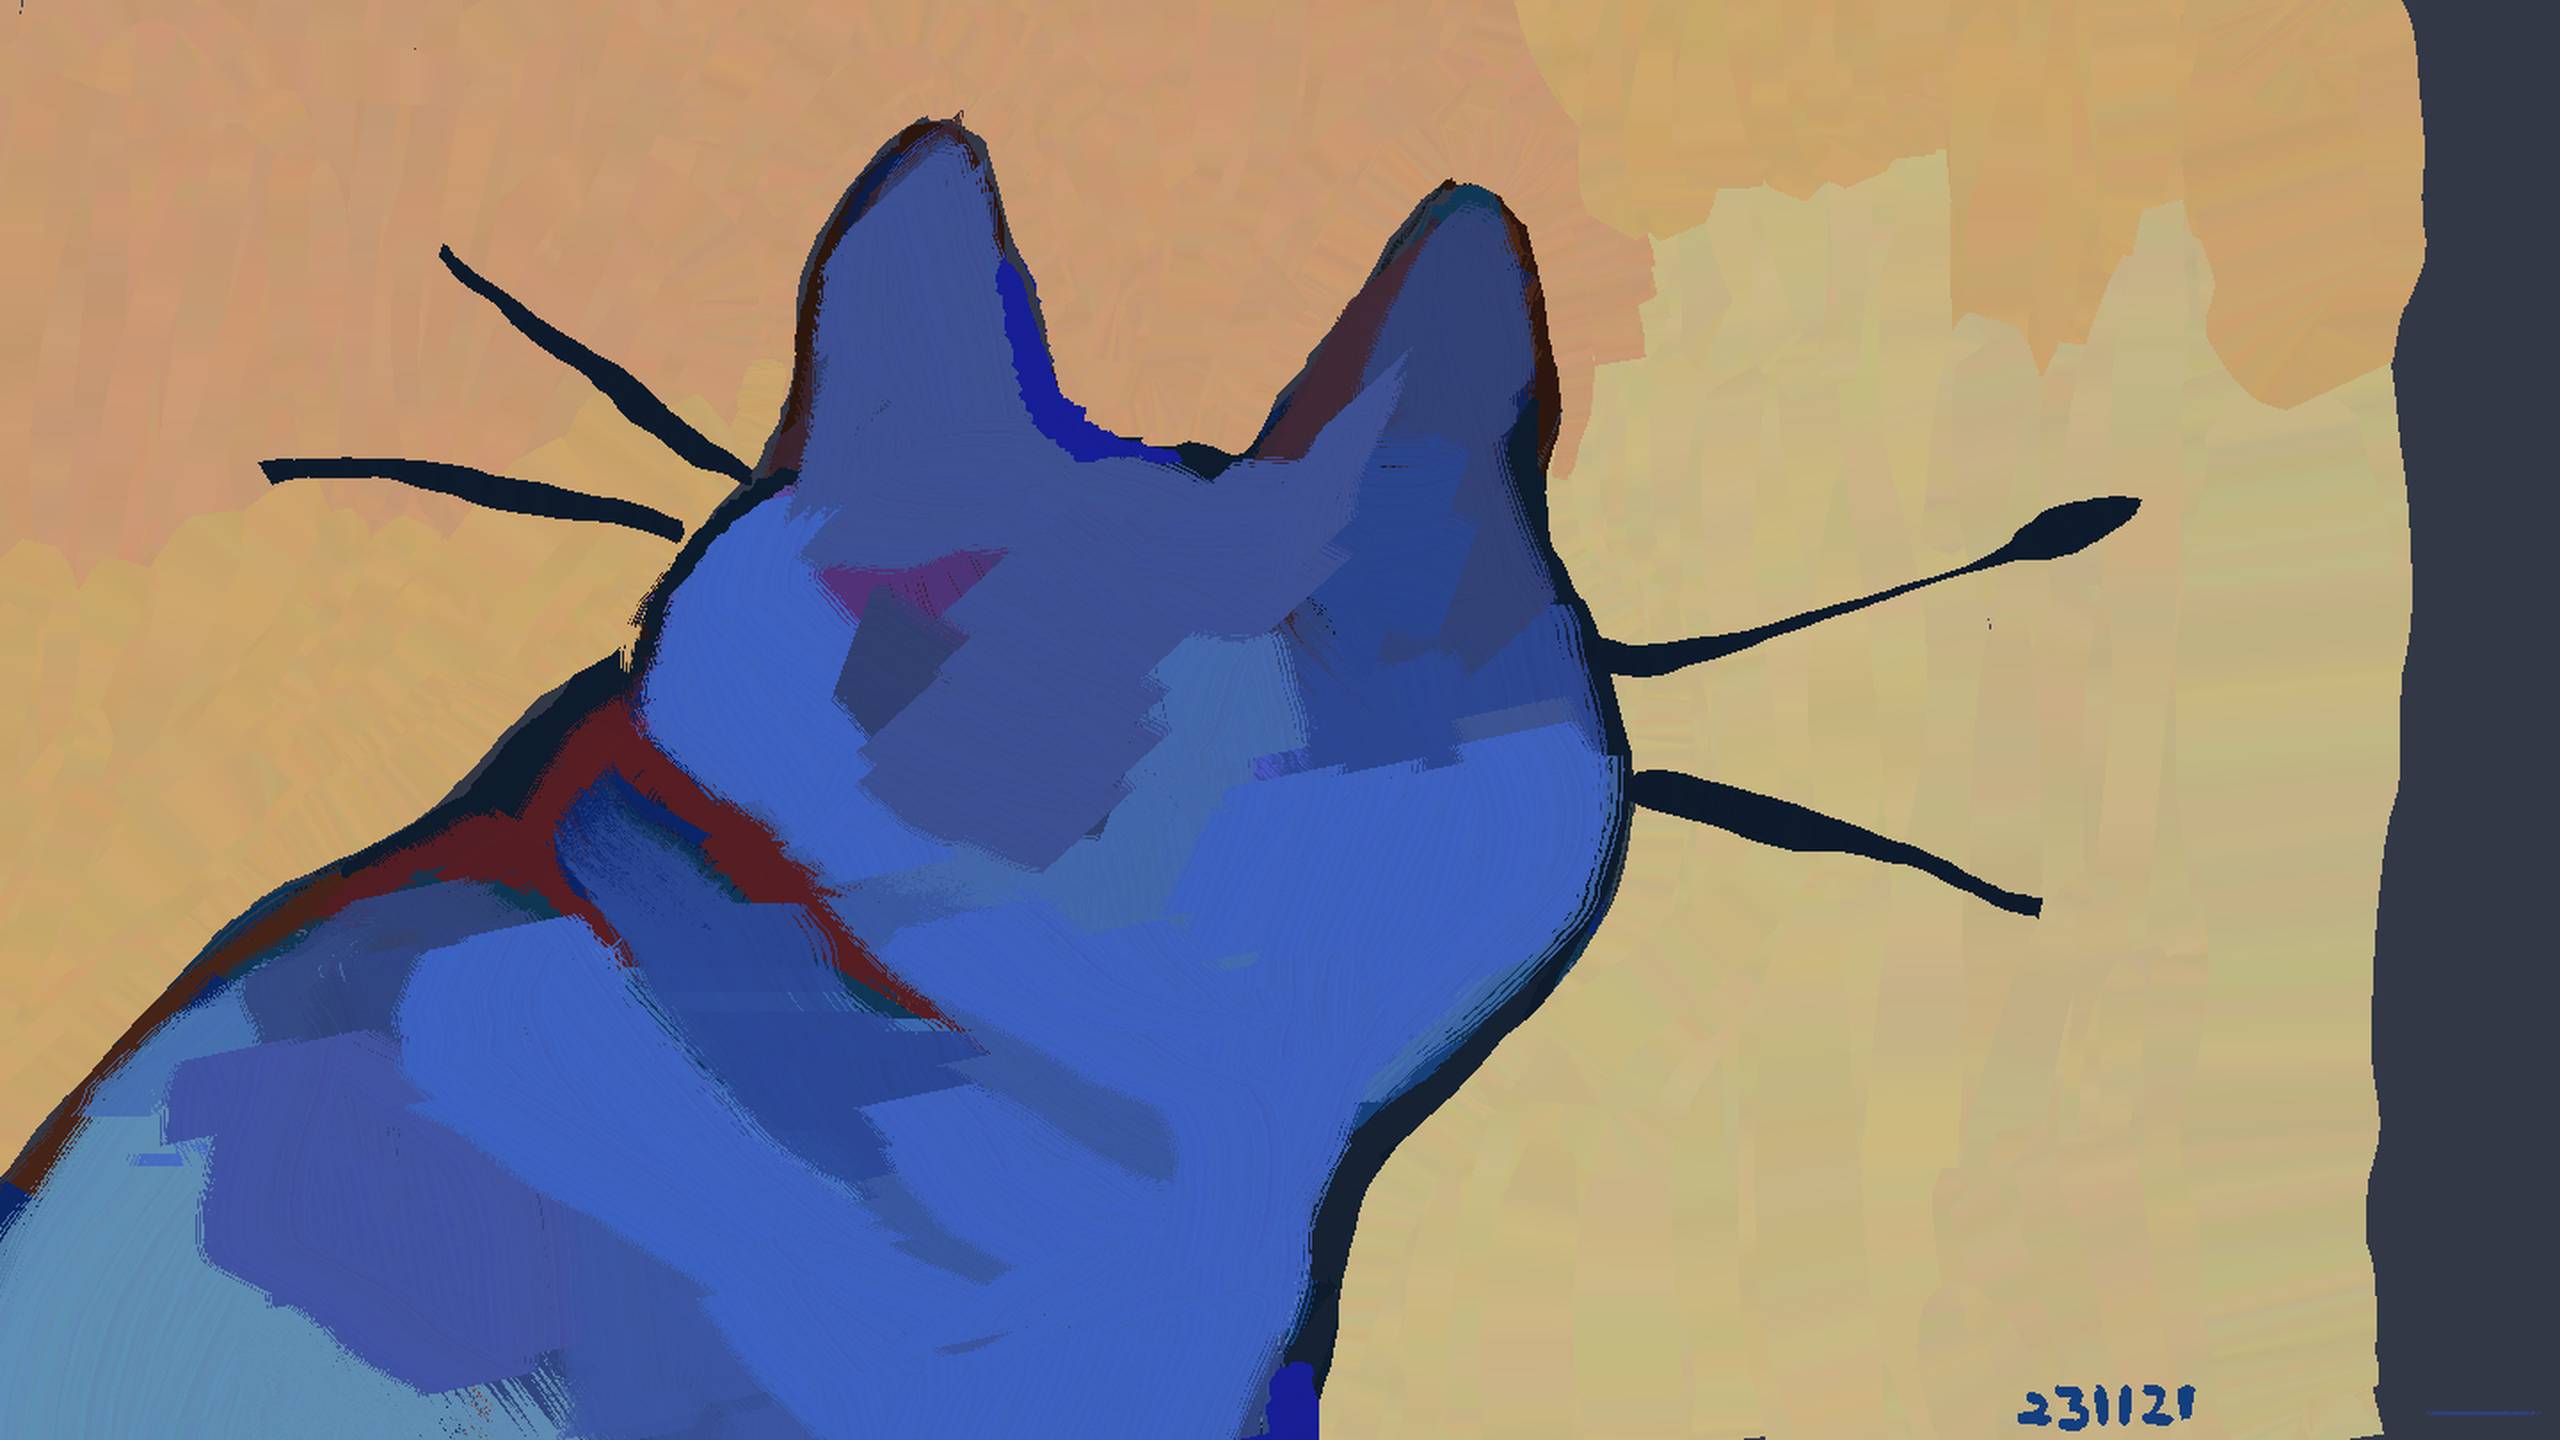 A simple, lined painting of the bust of a cat, facing away. The cat is blue, with red accents, the background bright yellow. The style is vaguely expressionistic